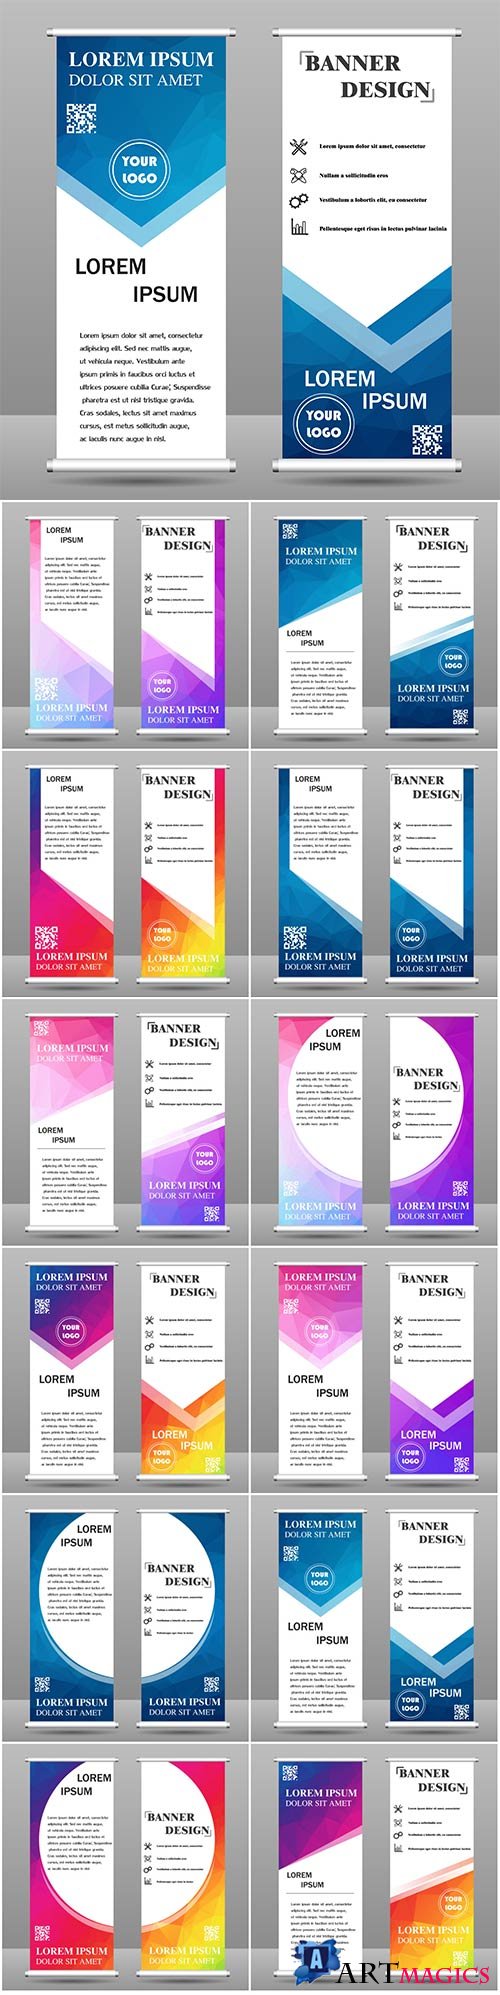 Collection banner design for business and education